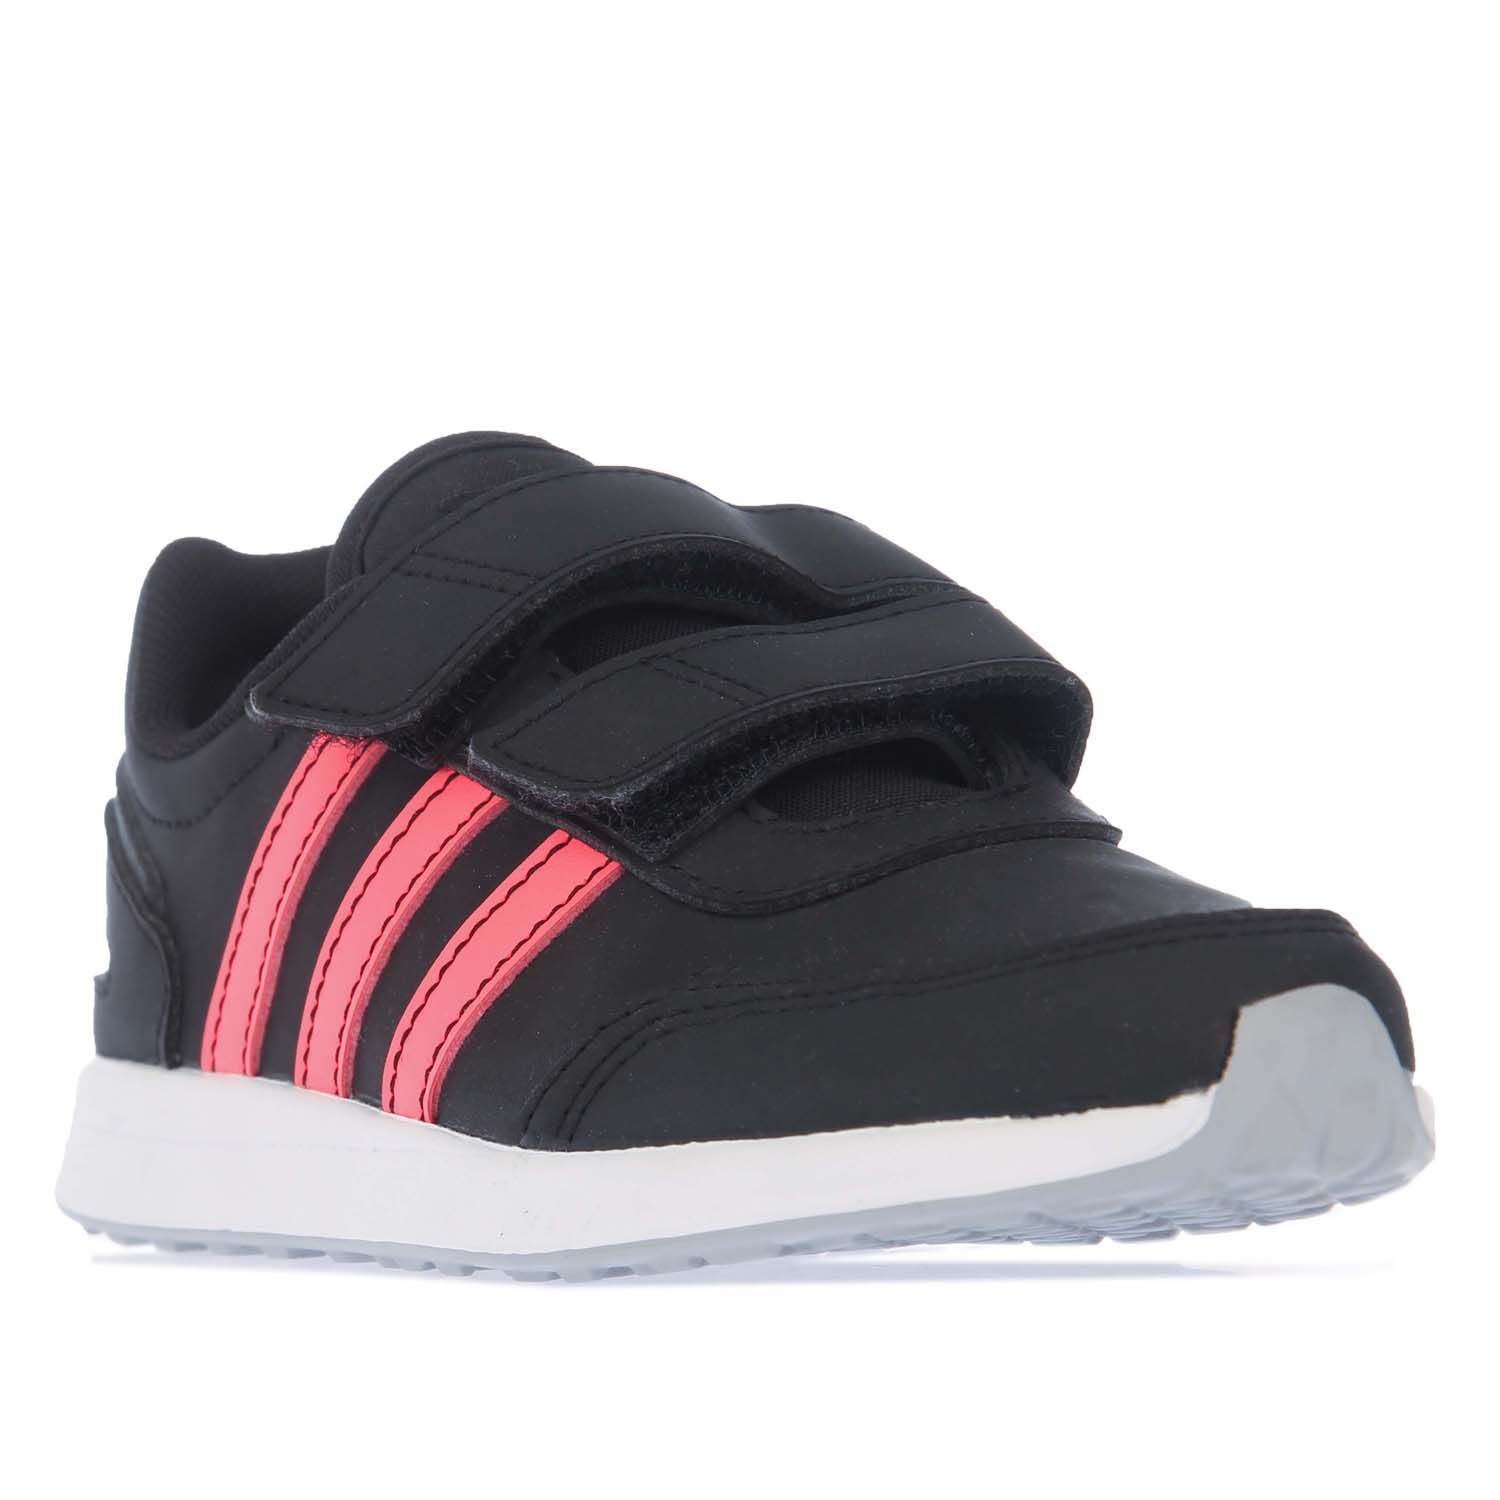 Childrens adidas VS Switch 3 Trainers in black pink.- Synthetic nubuck upper.- Hook-and-loop closure. - 3-Stripes added to the side. - adidas logo on the tounge and heel.- Cushioning midsole.- Rubber outsole.- Synthetic upper  Textile lining and sole.- Ref.: FW3982C